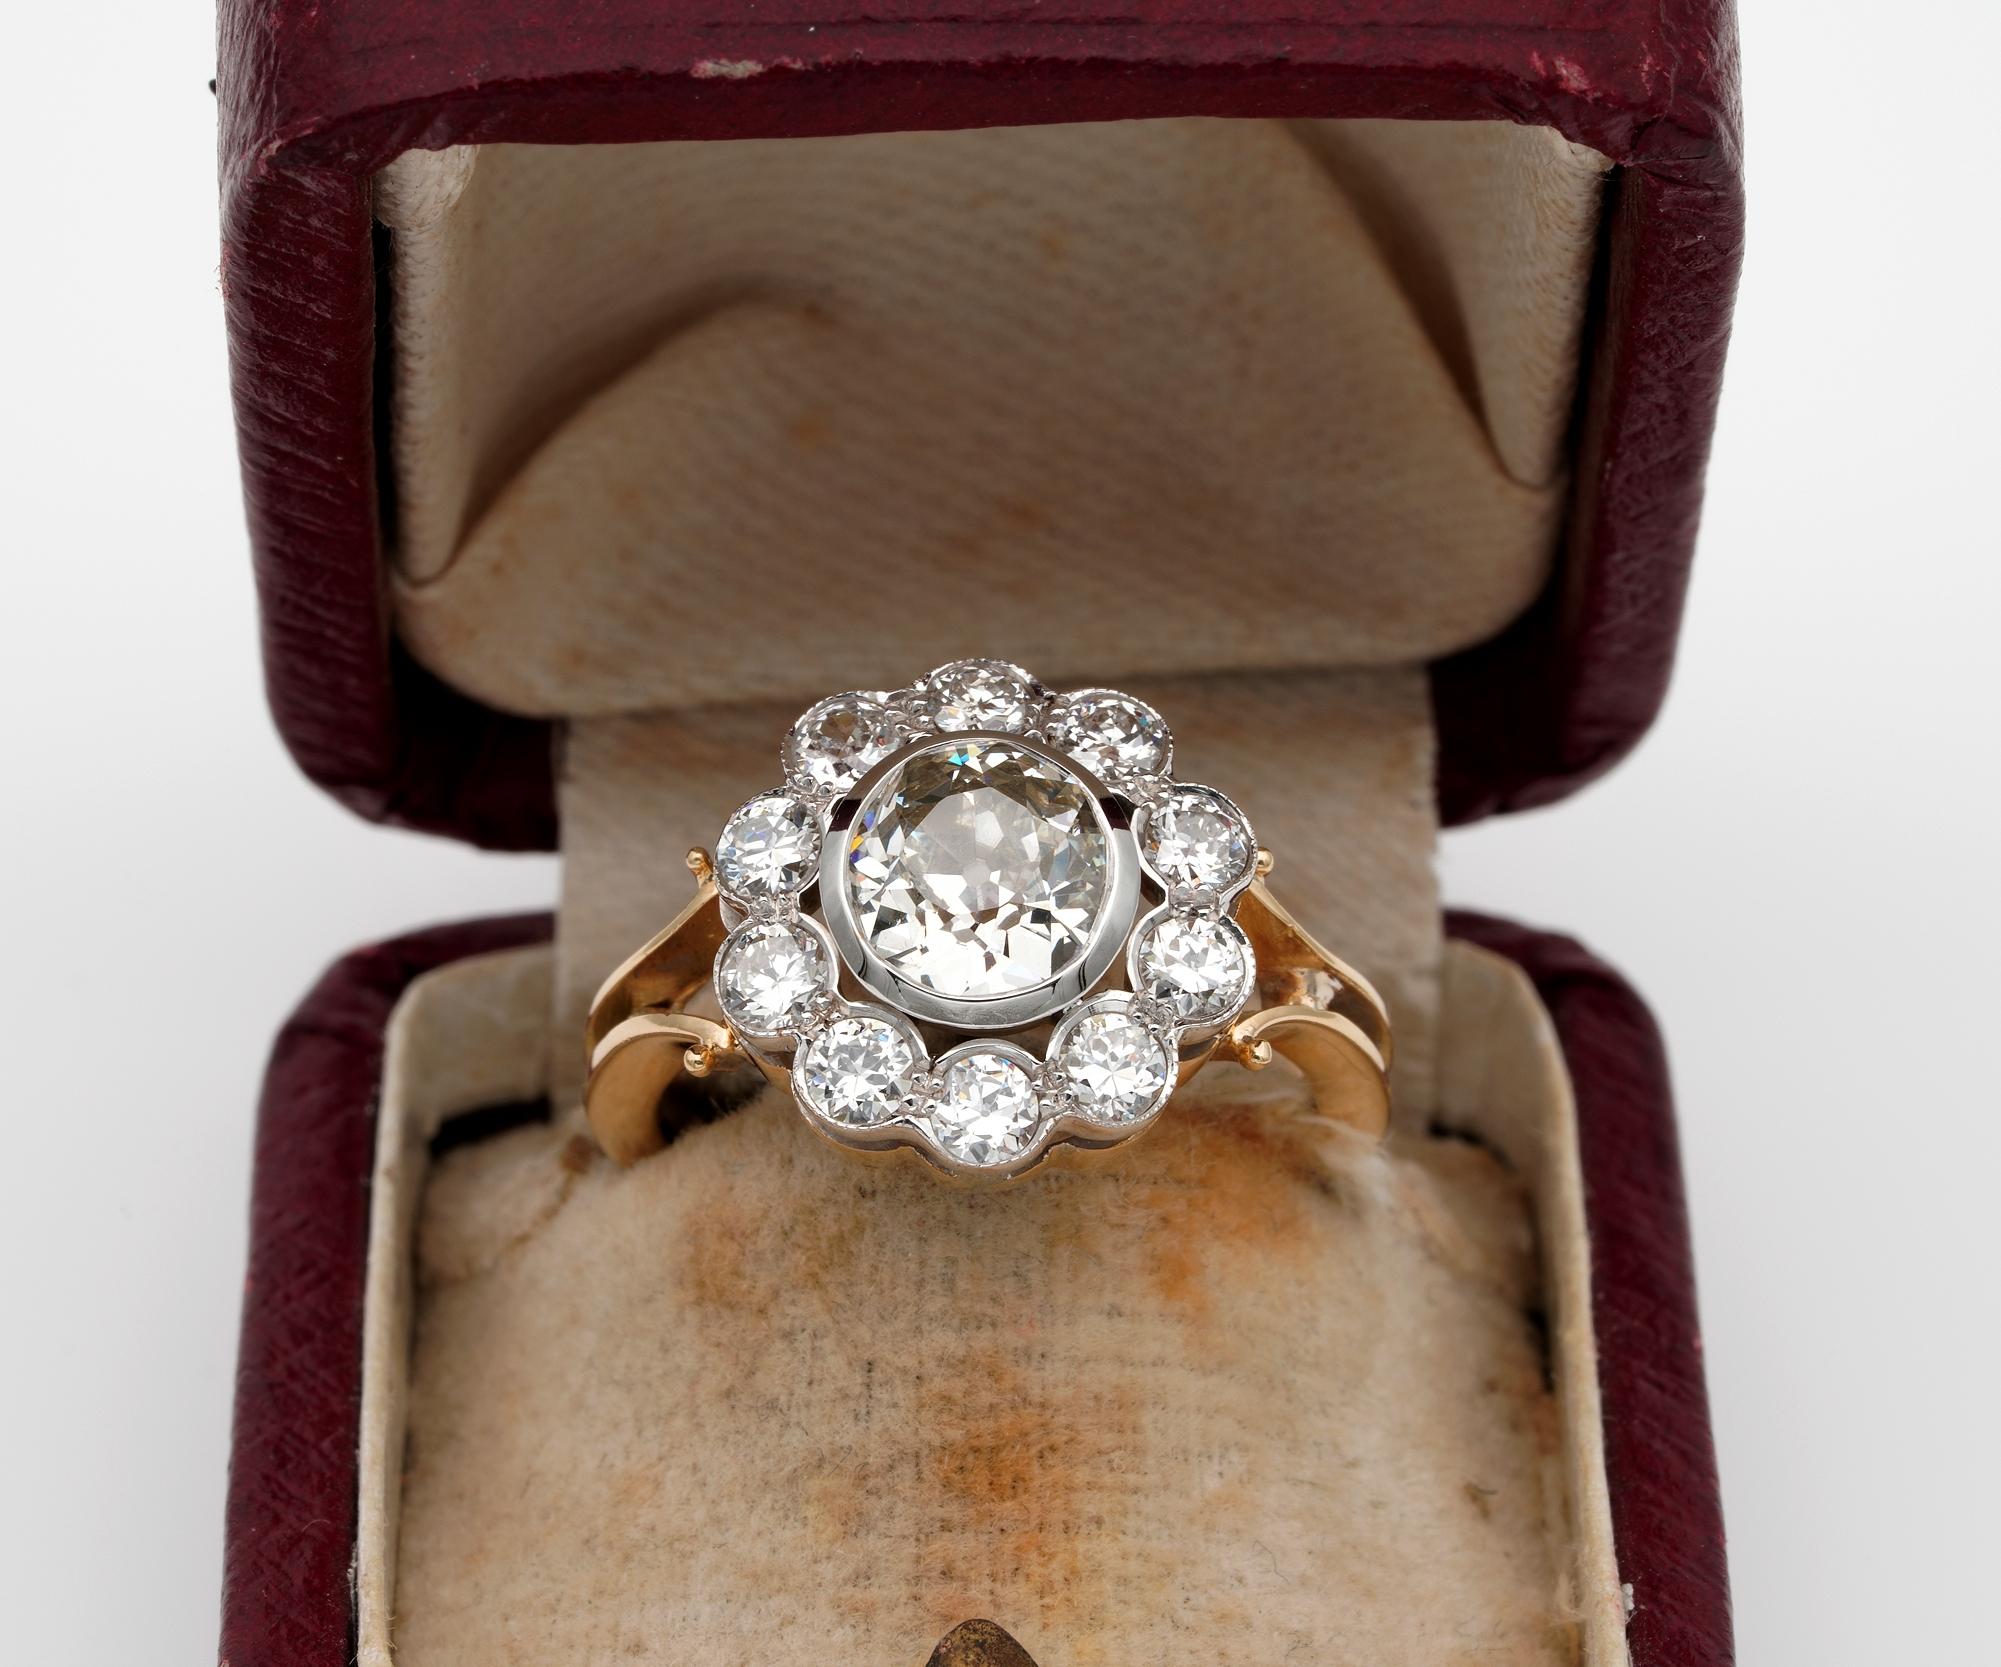 This beautiful and quite unique antique ring is original Edwardian period,
Hand fabricated during the time of solid 18 Kt combined with Platinum, designed in a classy cluster of Diamonds set in Daisy shape, most beloved, timeless and ever desired